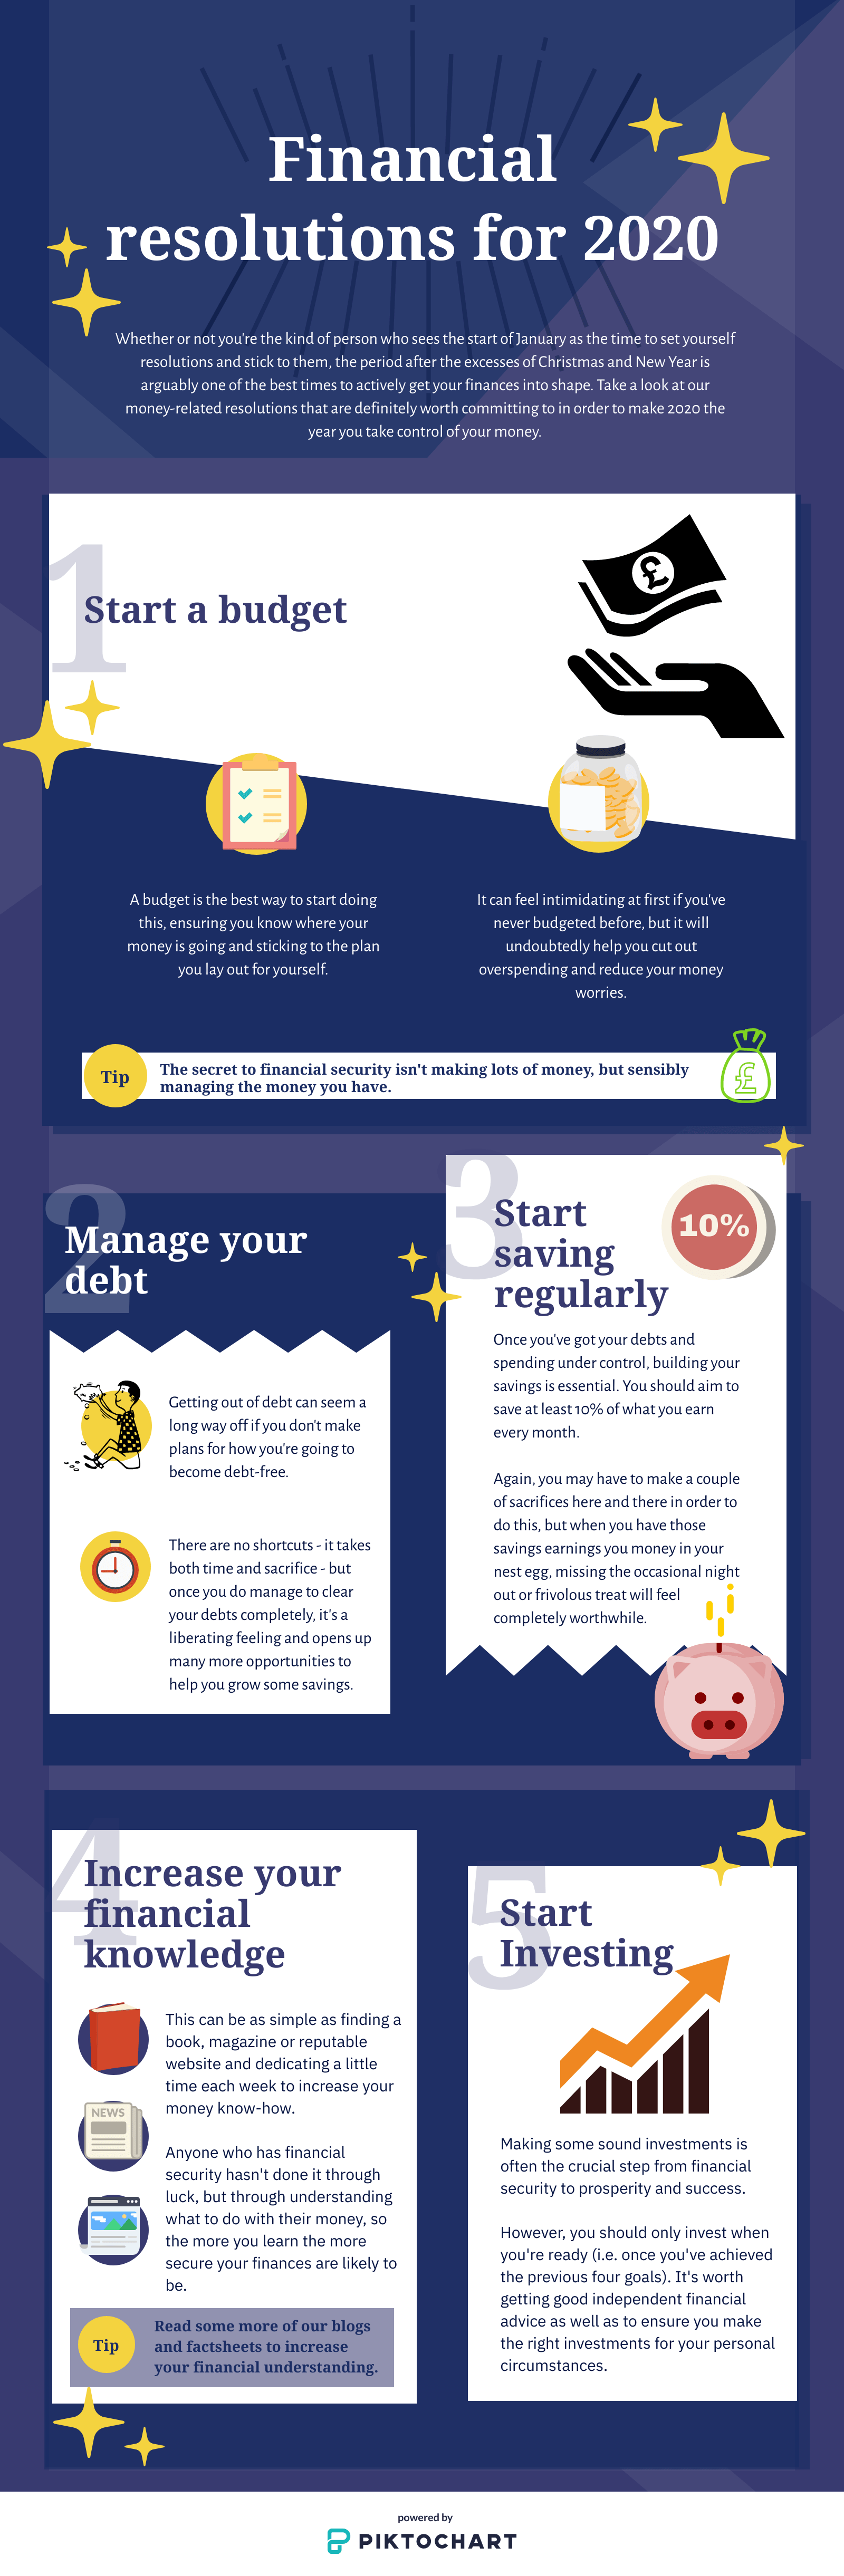 Financial resolutions for 2020 (infographic) | Gale and Phillipson